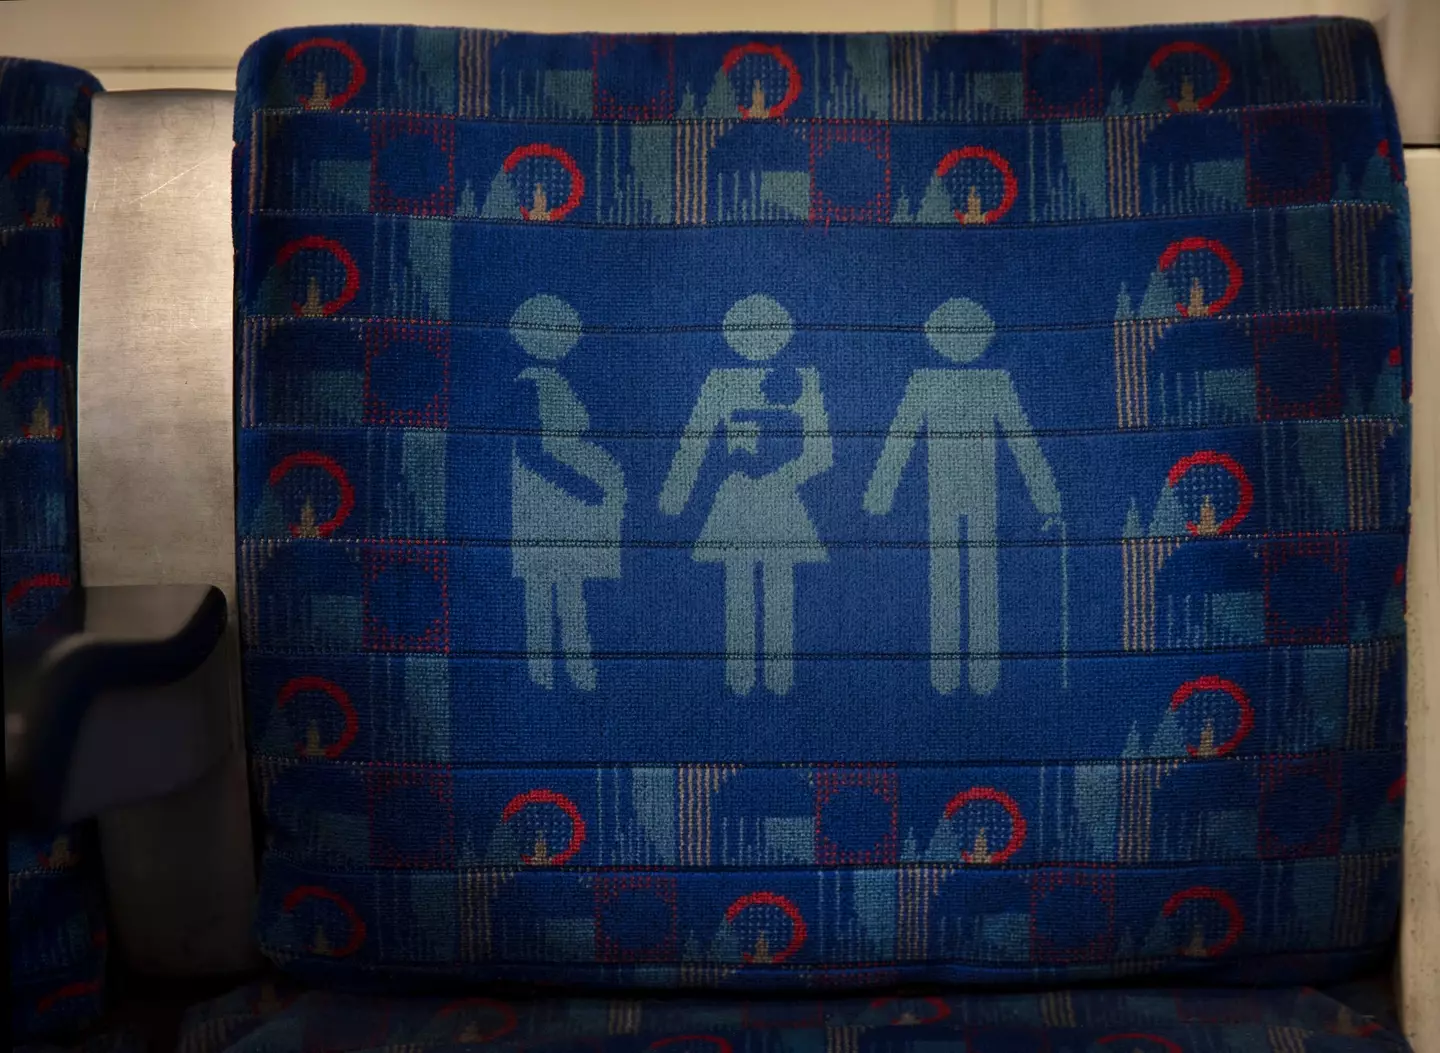 Trains have seats for those less able to stand, but what about when nobody offers to give them up?